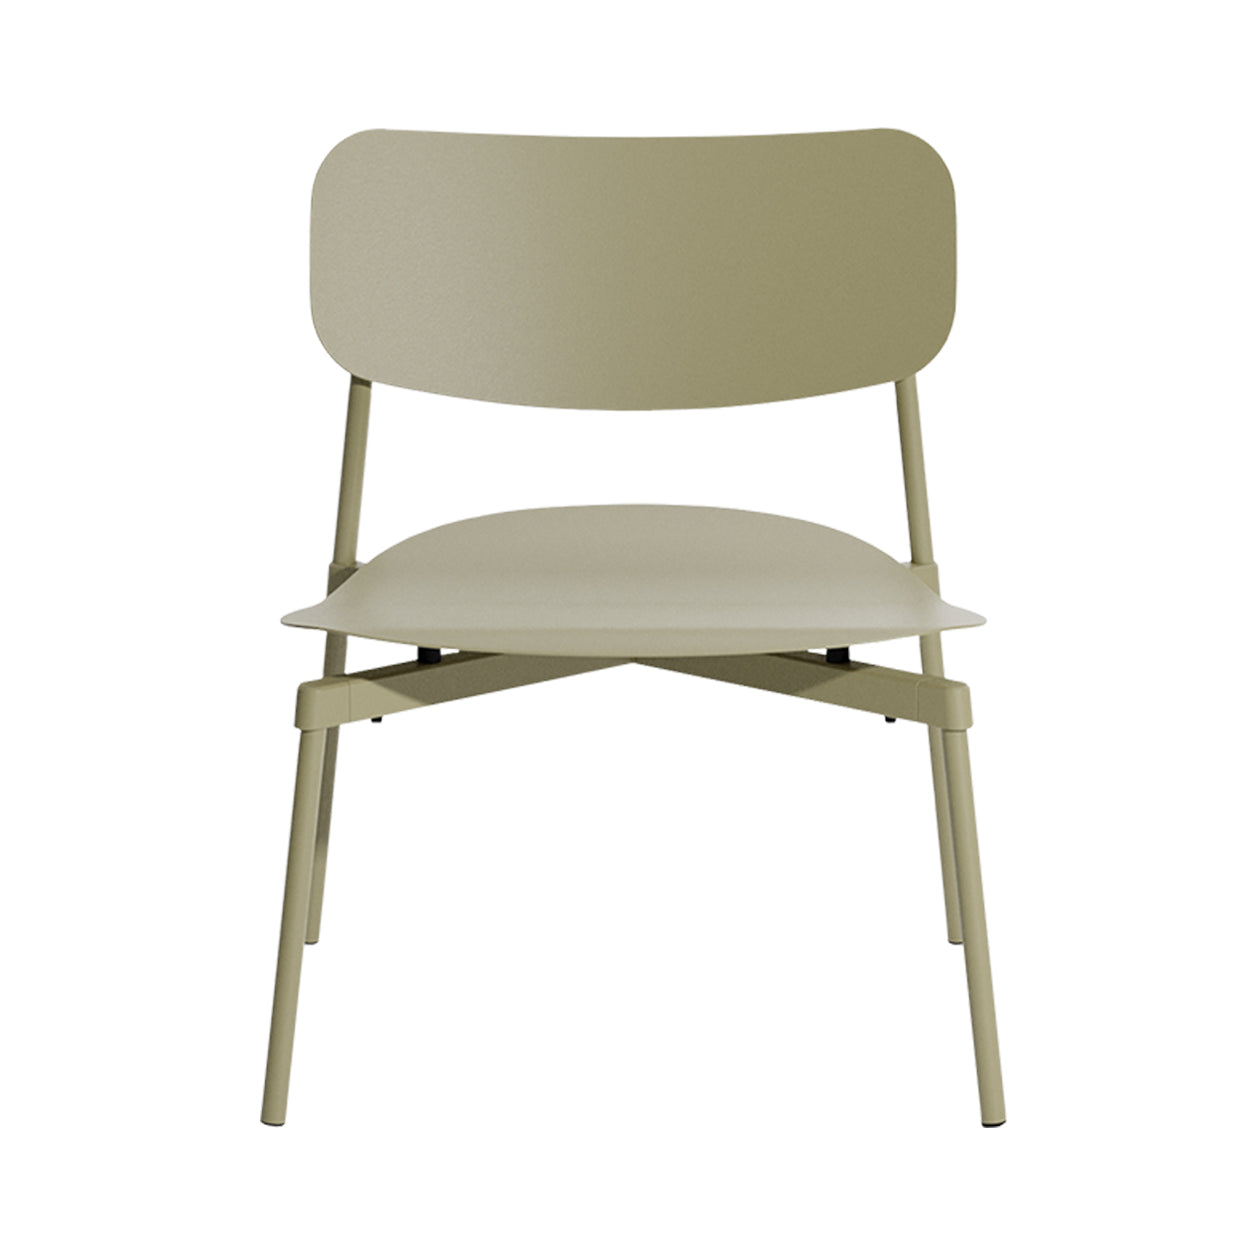 Fromme Stacking Lounge Chair: Jade Green